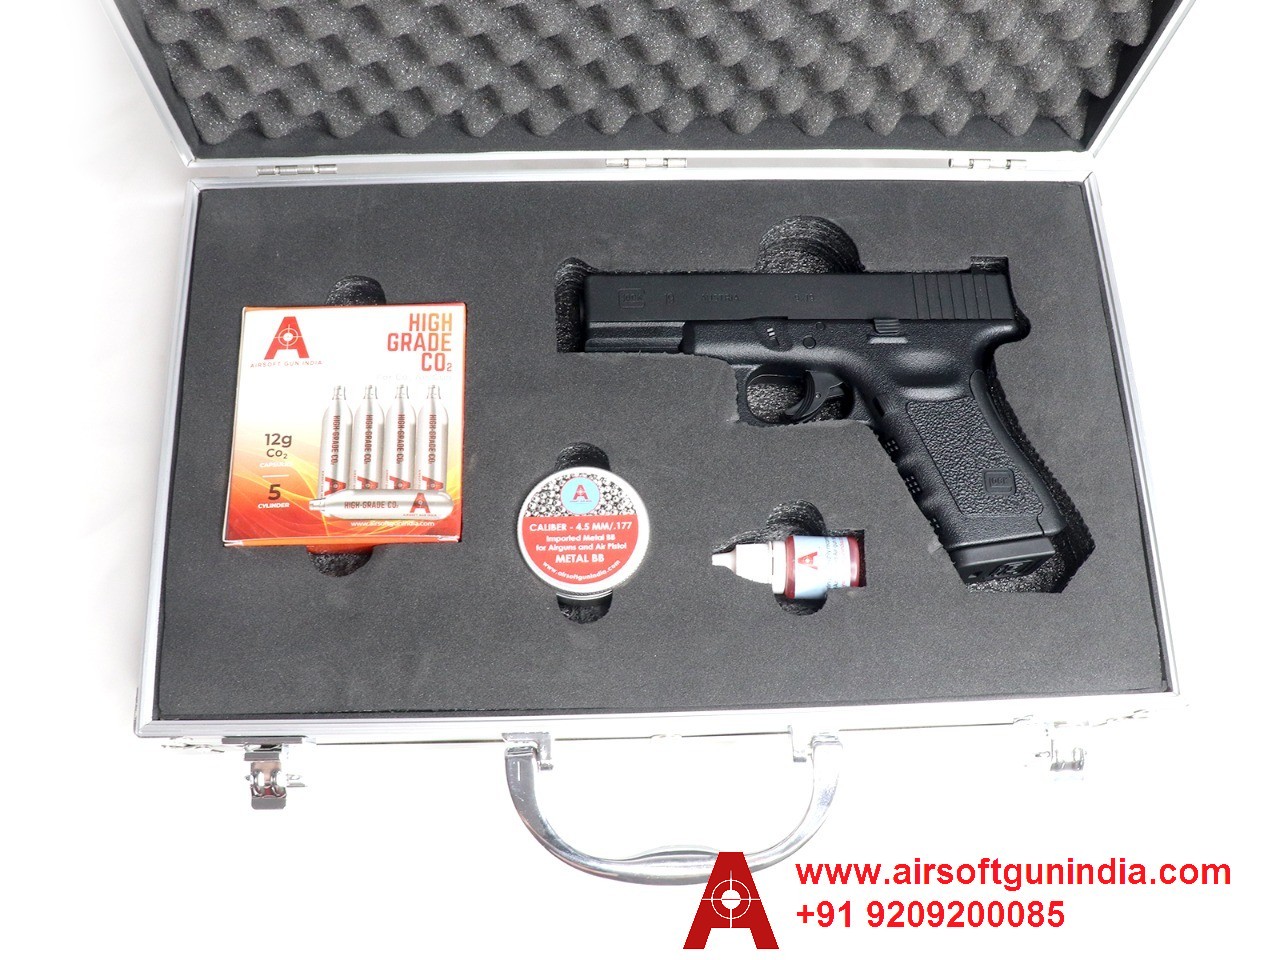 Customized Case For Umarex Glock 19 4.5mm Co2 BB Air Pistol By Airsoft Gun India